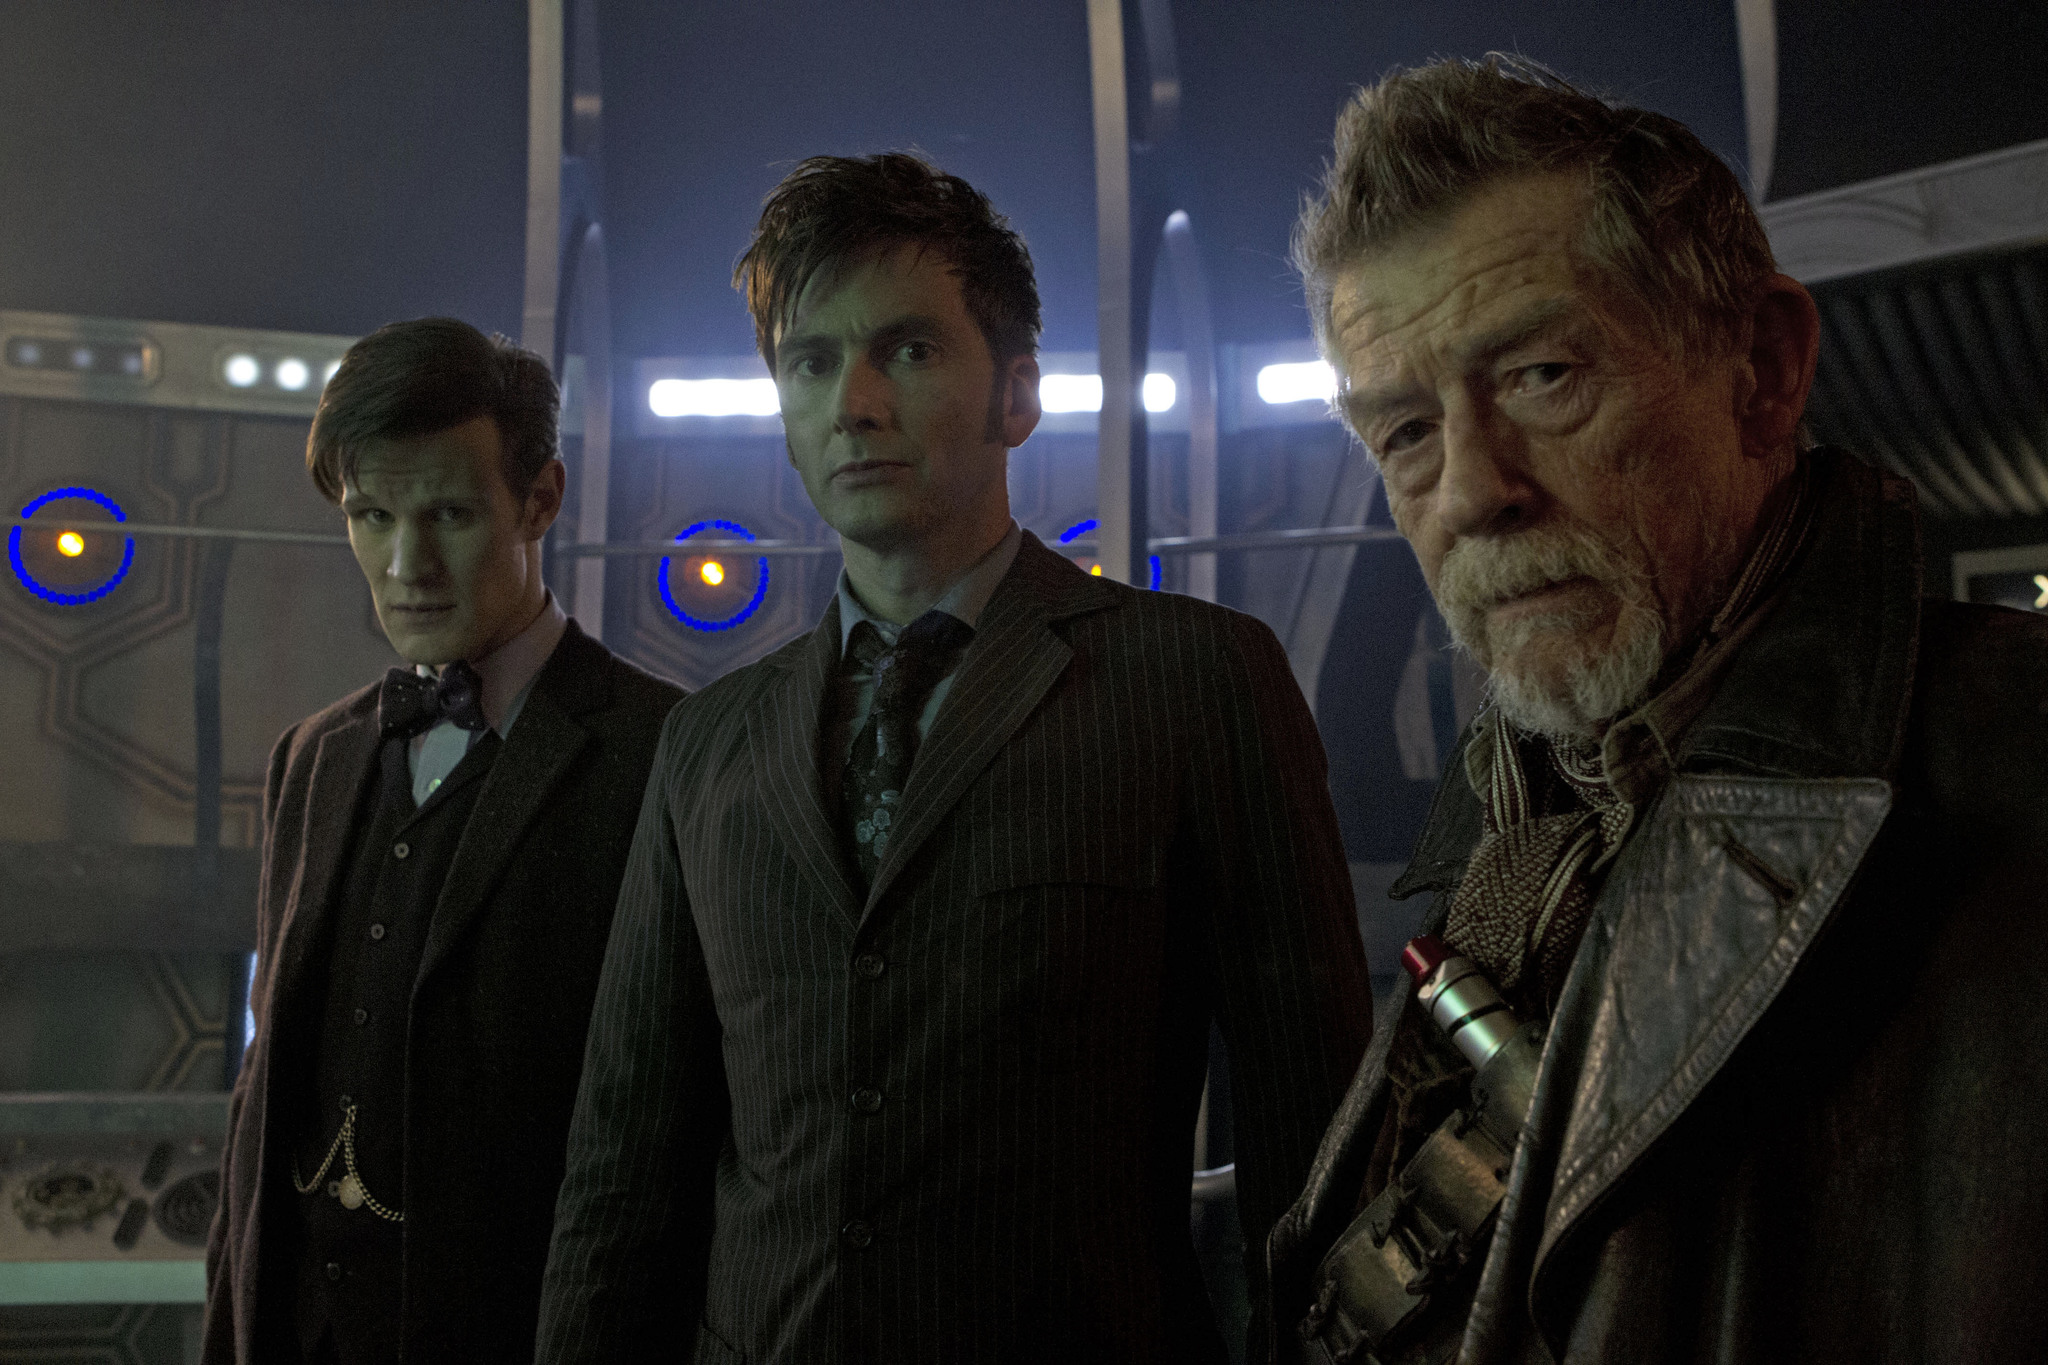 John Hurt, David Tennant, and Matt Smith in The Day of the Doctor (2013)